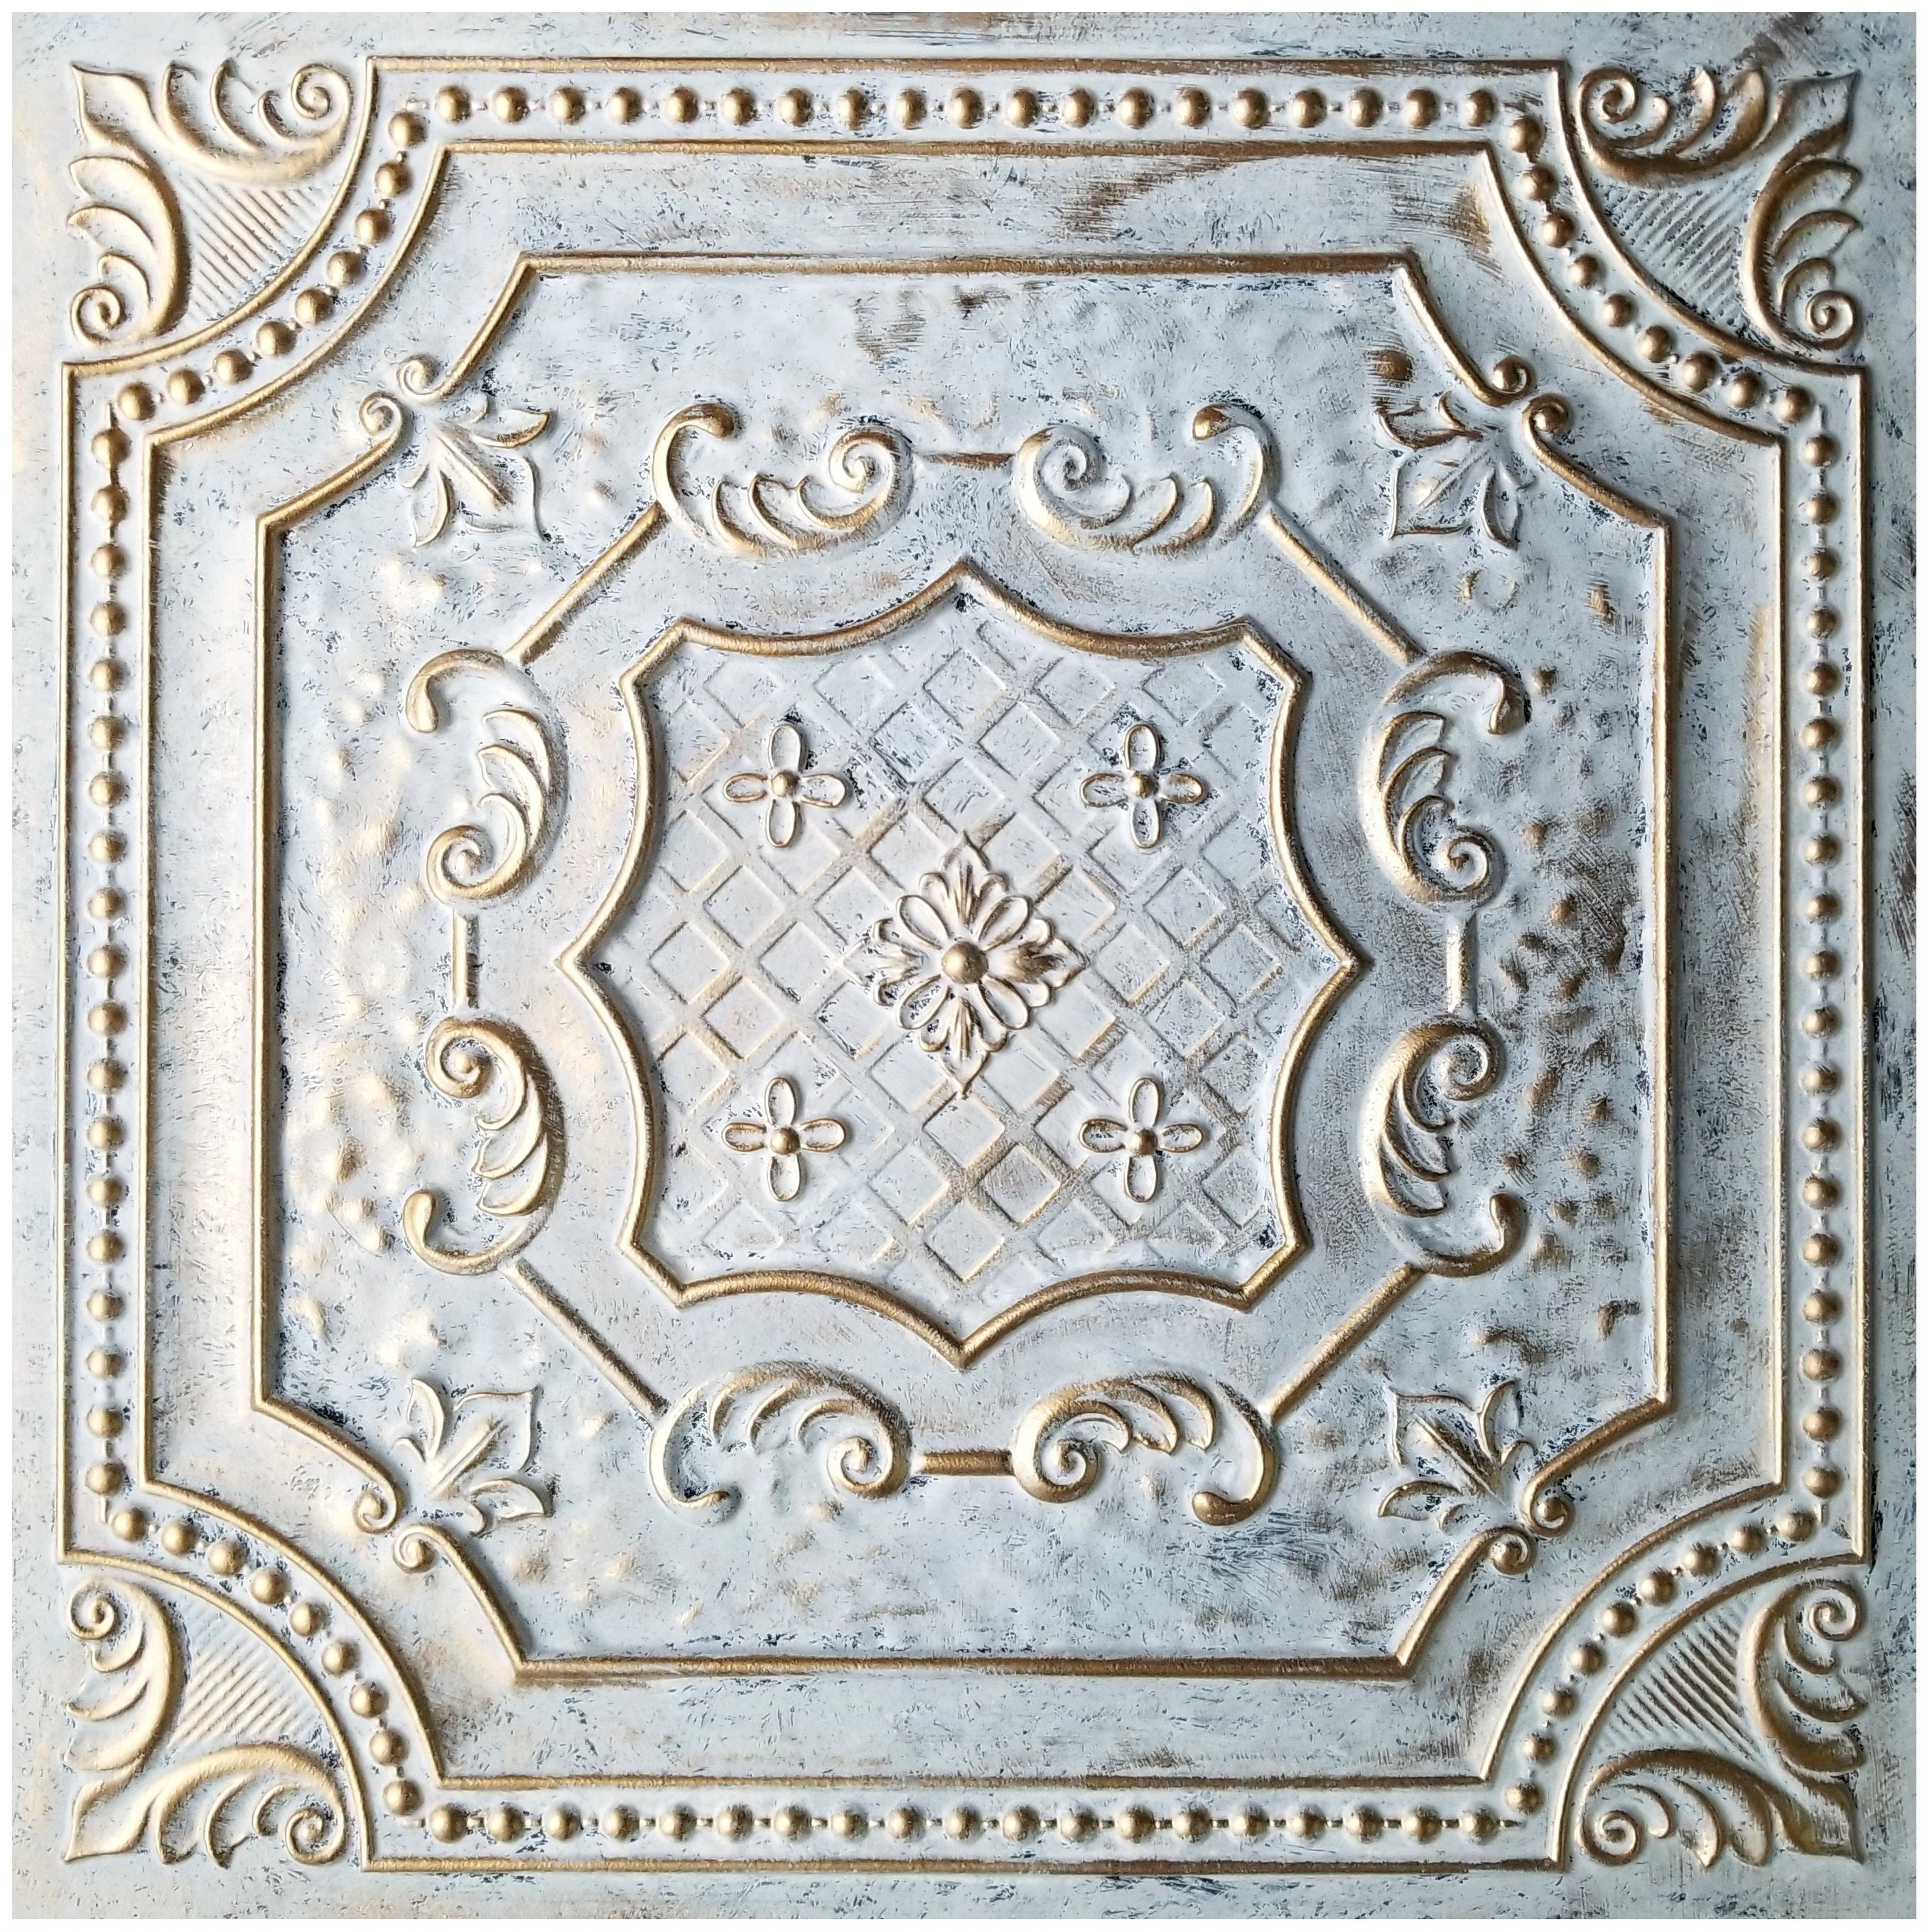 Great as a Backdrop. Pack of 5 2X2 Panels ~ 20 sq.ft Easy to Install Decorative Ceiling Tiles #TD04 Gorgeous Antique Look PVC Tiles Faux Tin Glue up or Drop in Ceiling Tile in Aged Copper